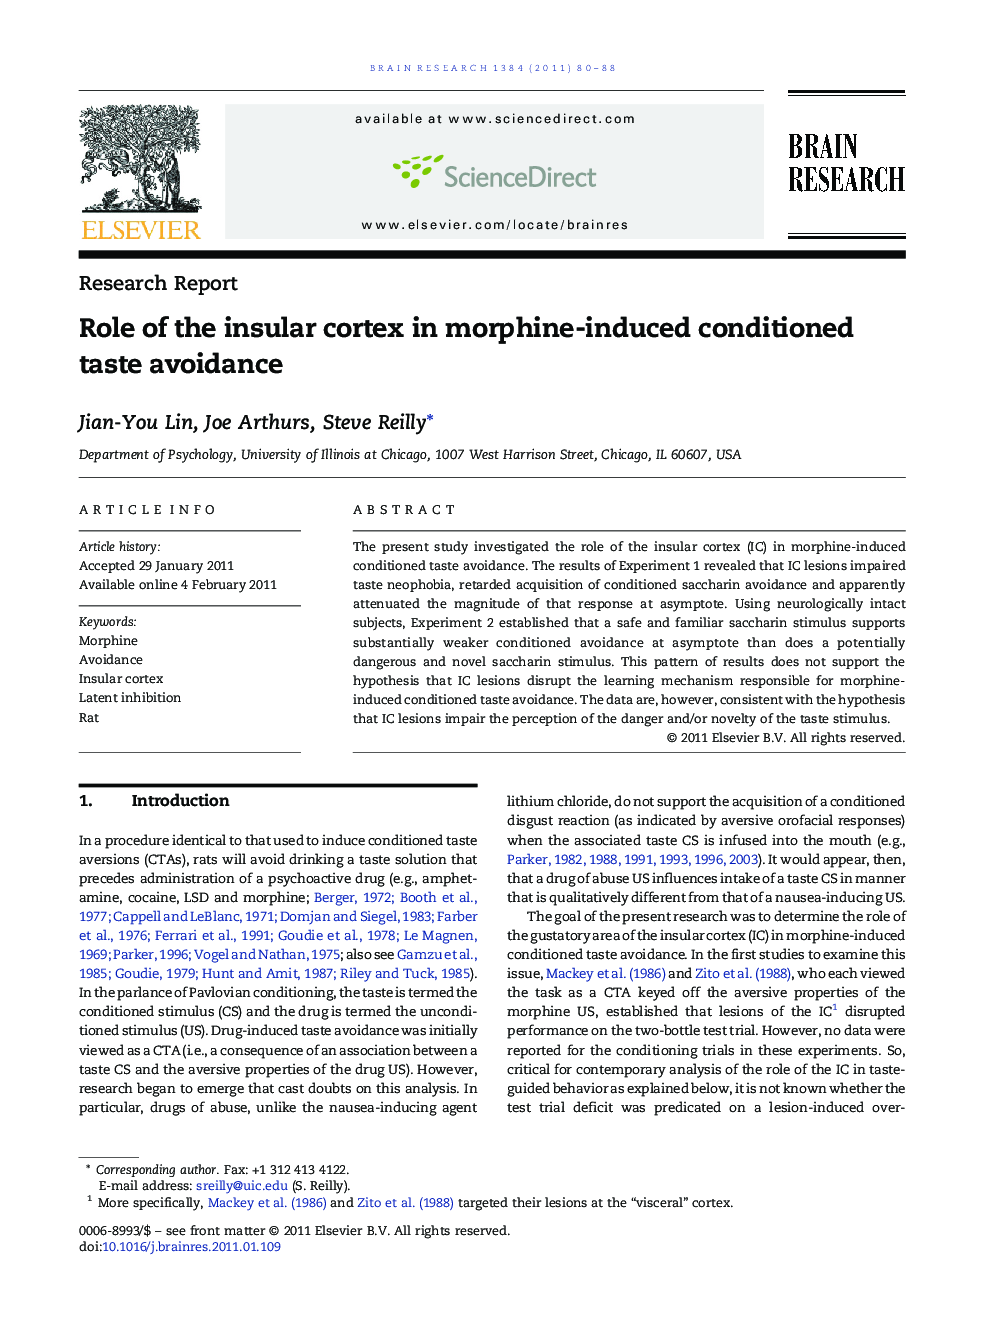 Research ReportRole of the insular cortex in morphine-induced conditioned taste avoidance